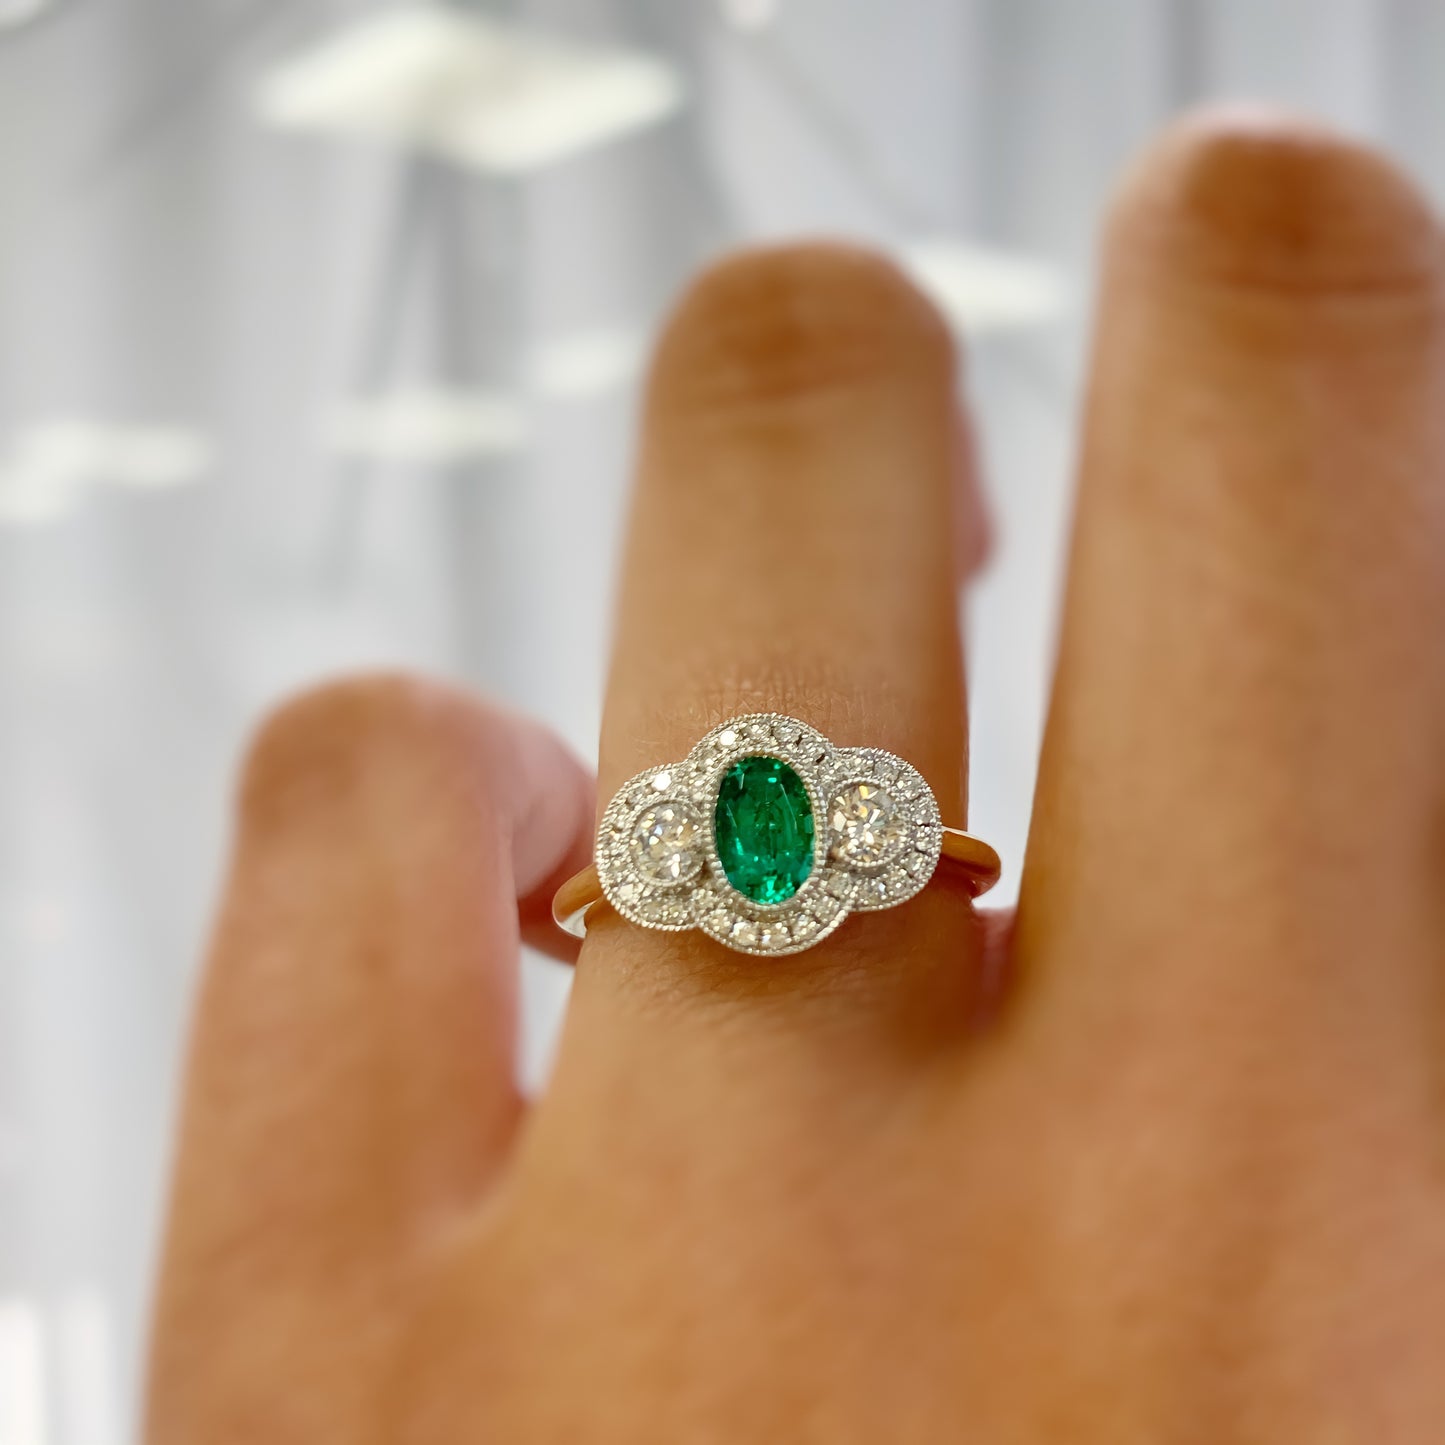 18ct Yellow Gold Art Deco Inspired Emerald And Diamond Ring - SIZE N